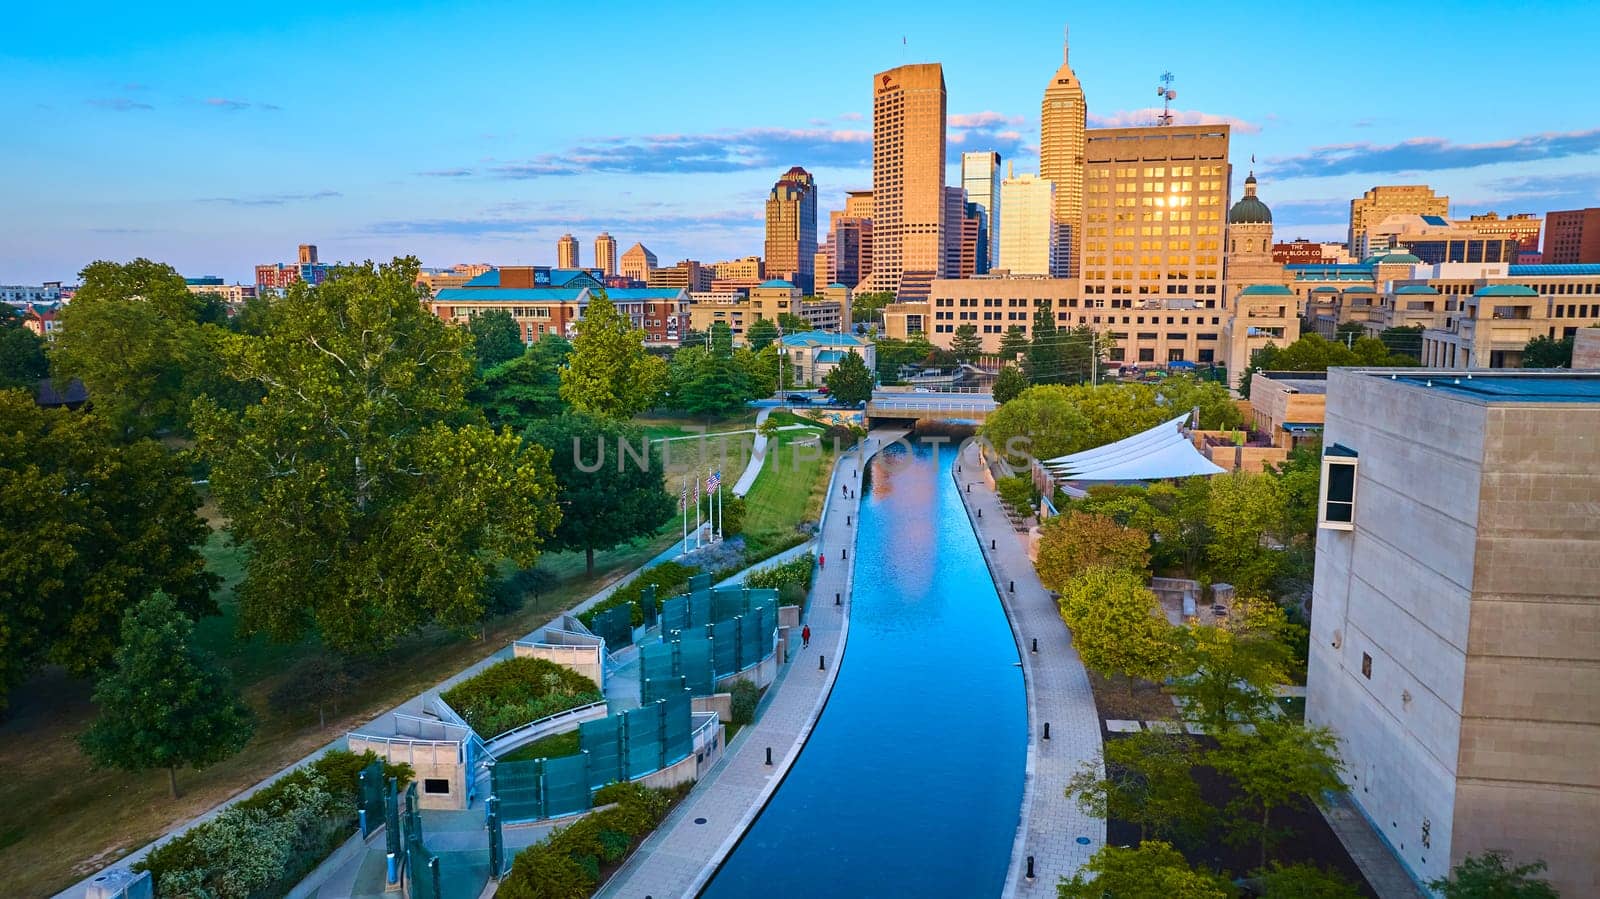 Sunset Glow on Indianapolis: Aerial View of Urban Development and Canal, Captured by Drone